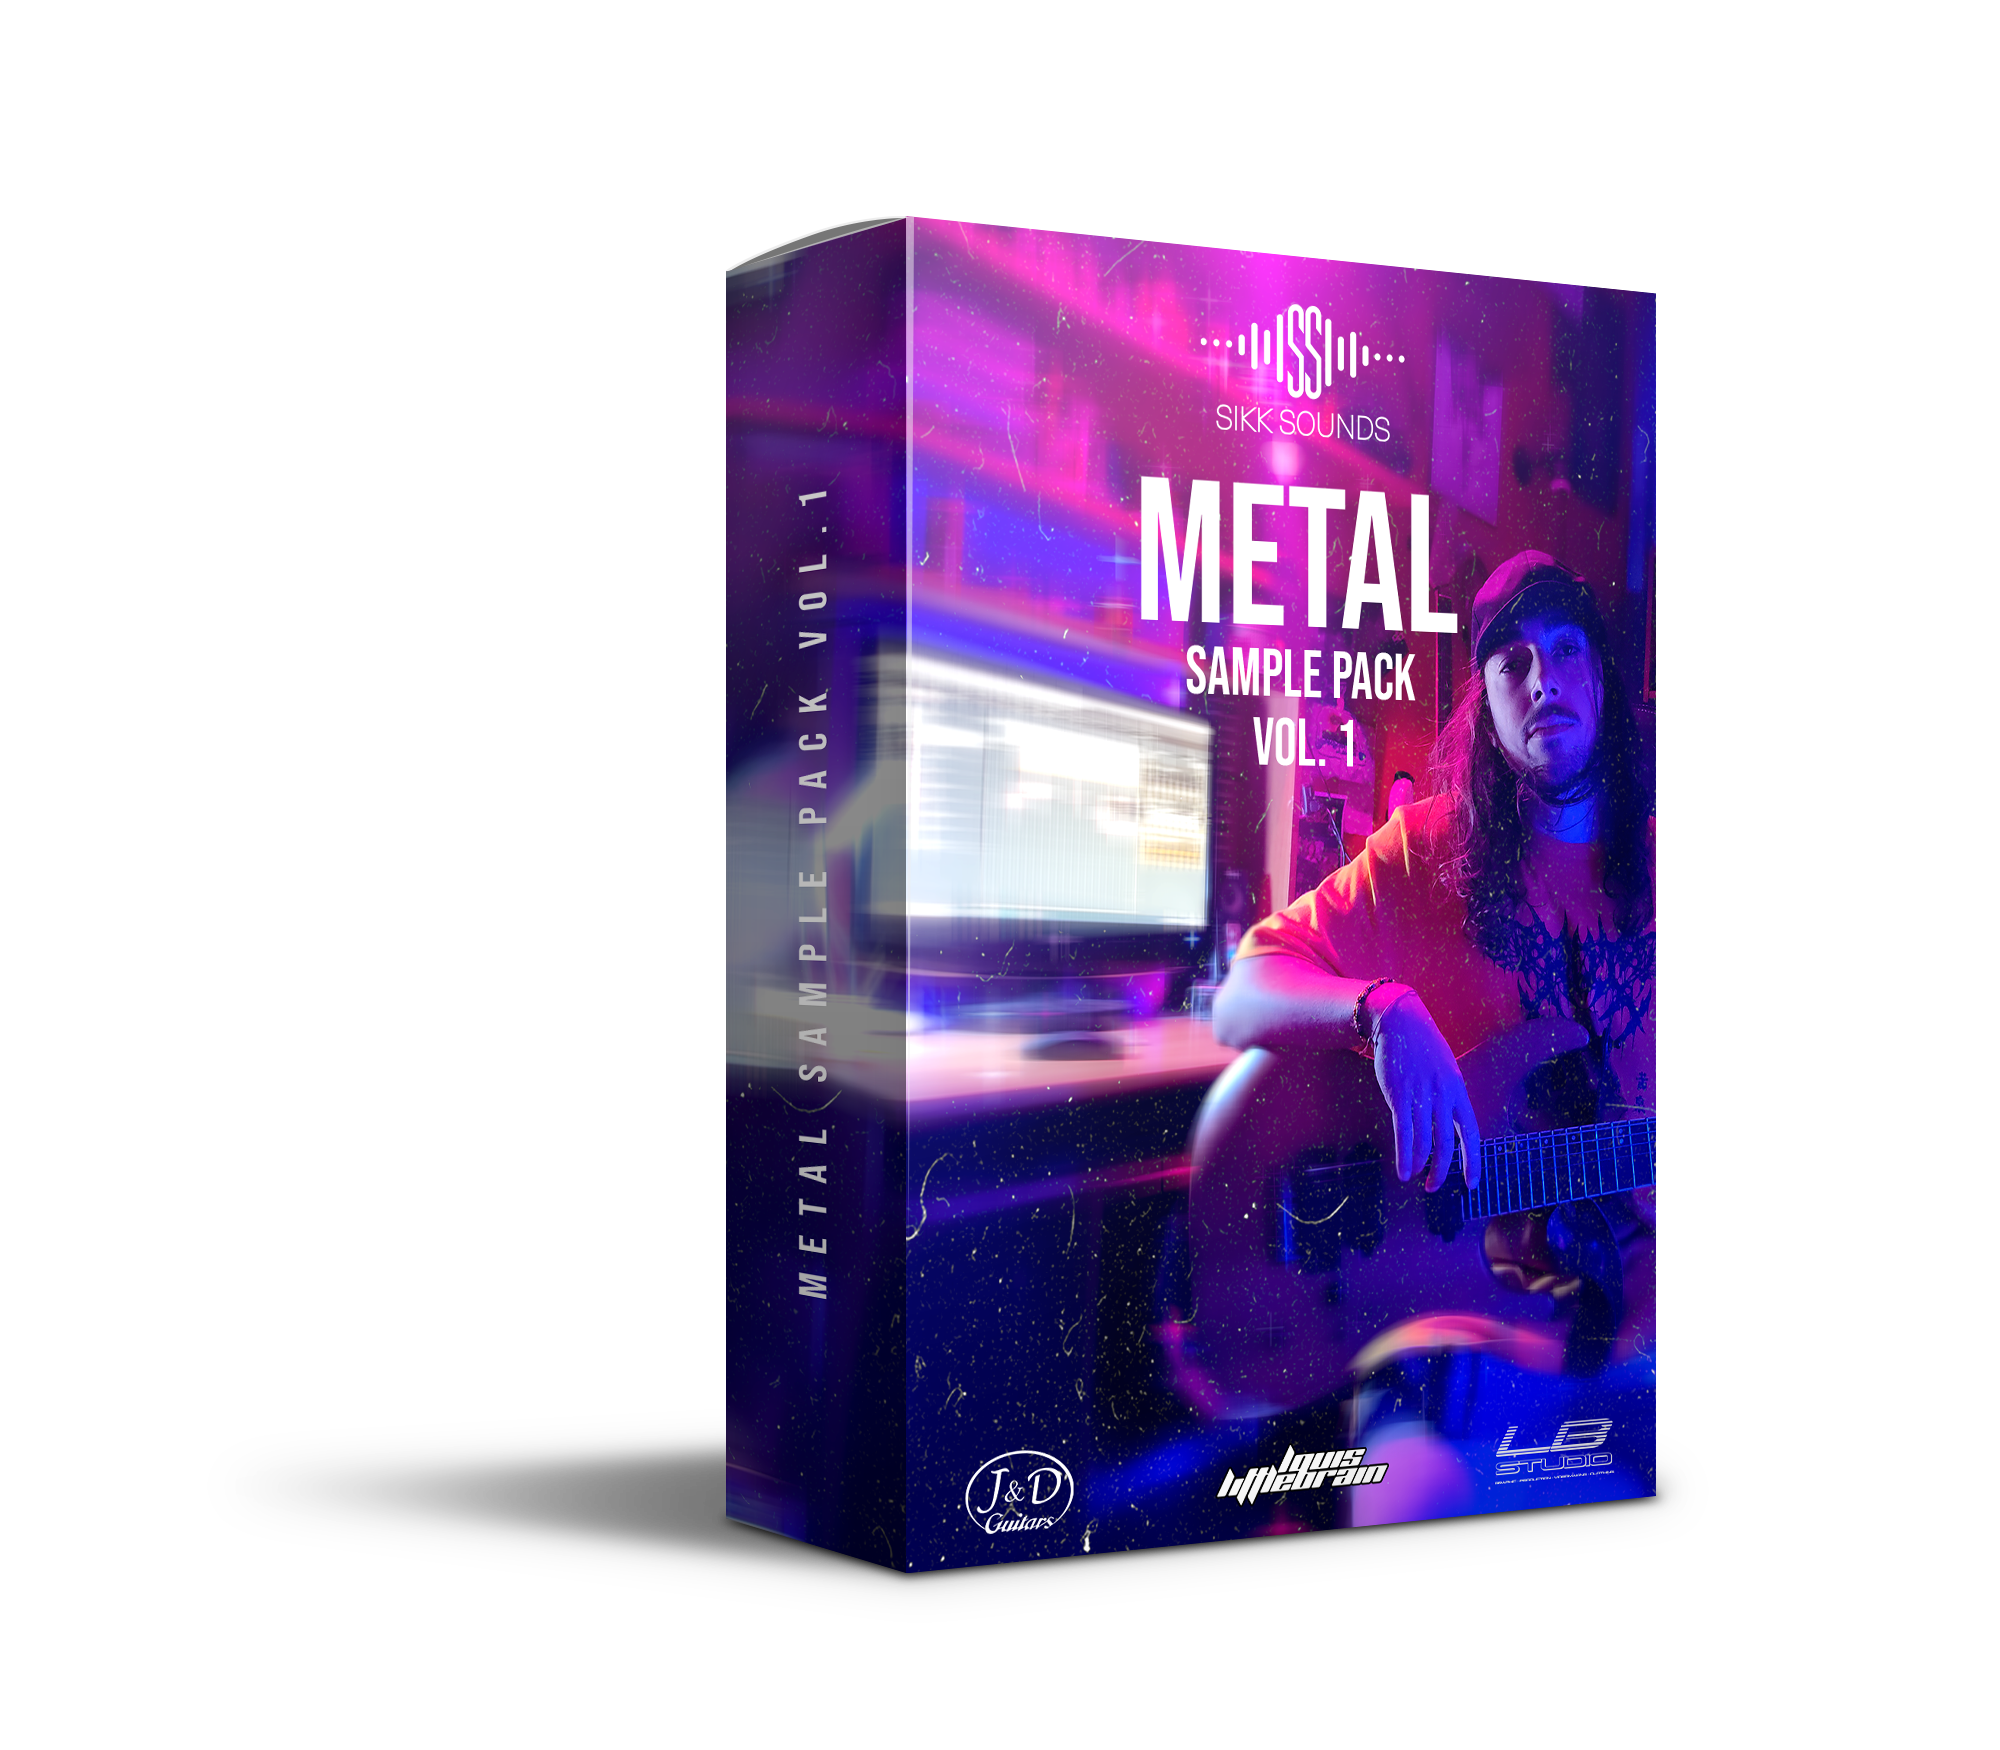 Unleash Power and Aggression with Sikk Sounds Metal Sample Pack Vol.1